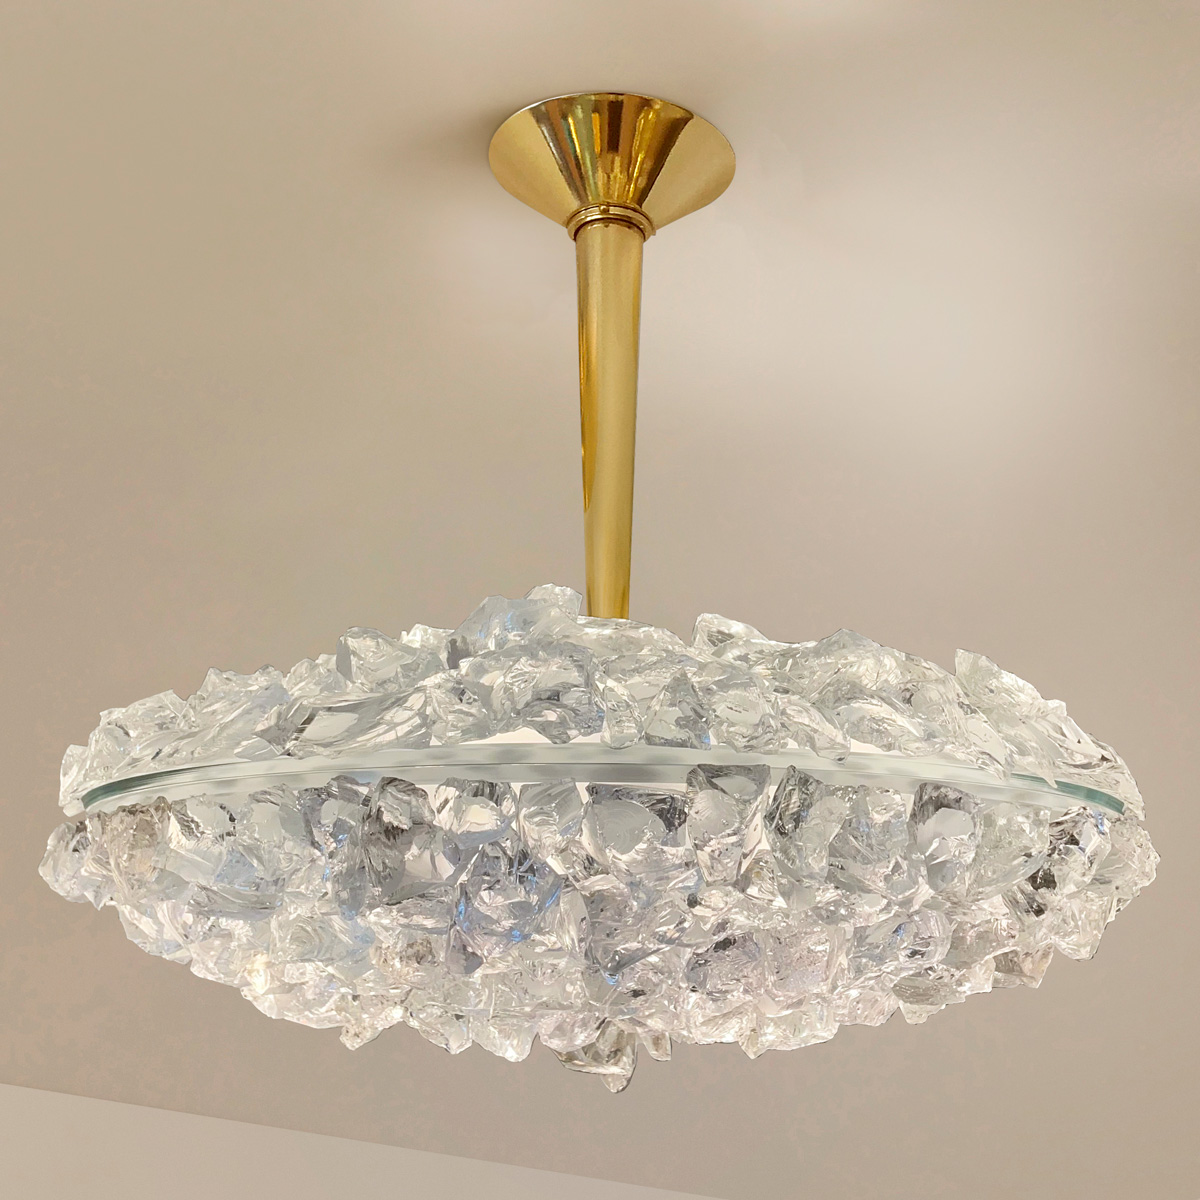 matera grande ceiling light by gaspare asaro